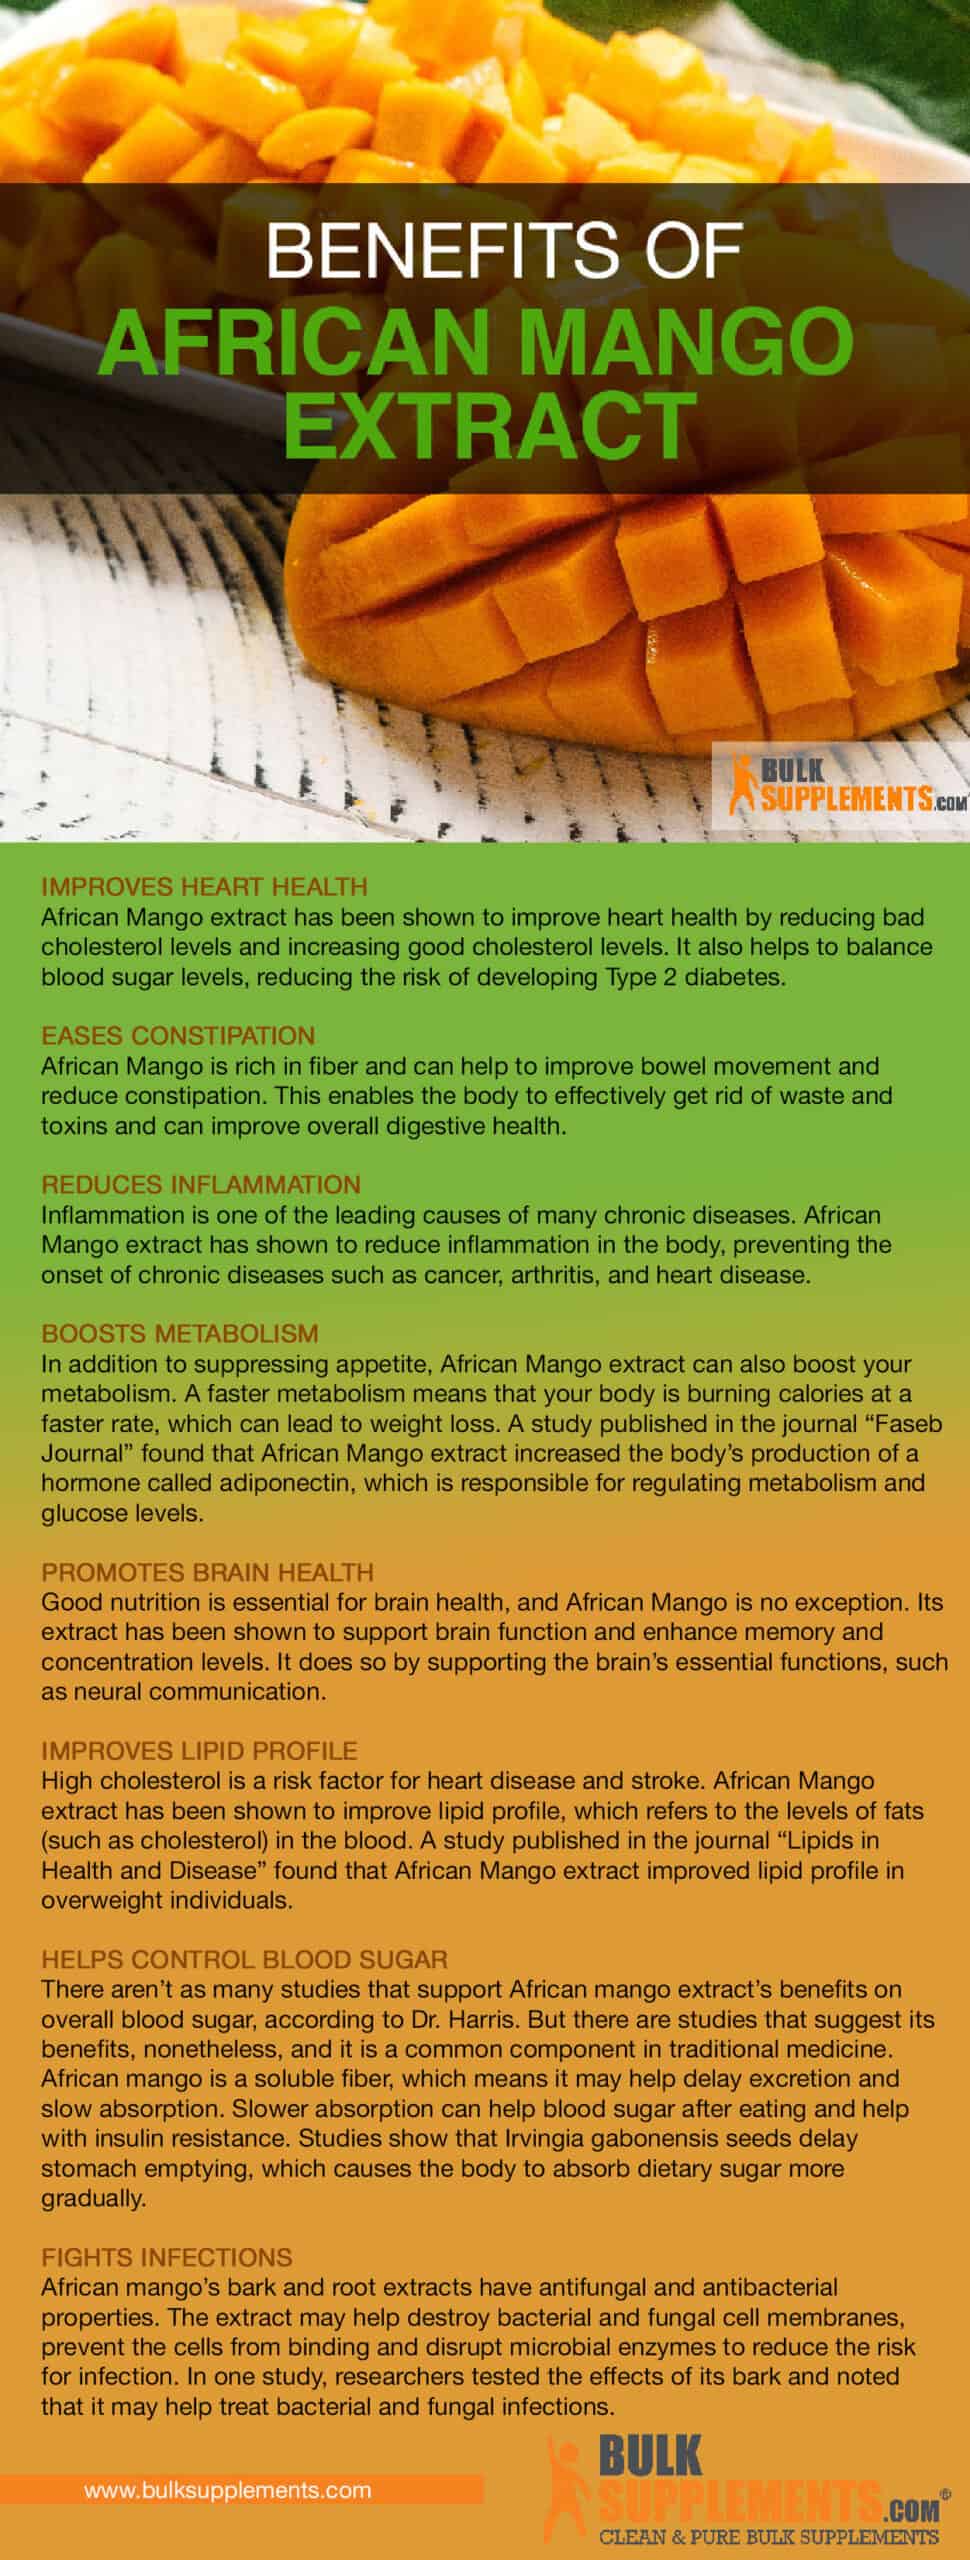 African Mango seed cognitive function